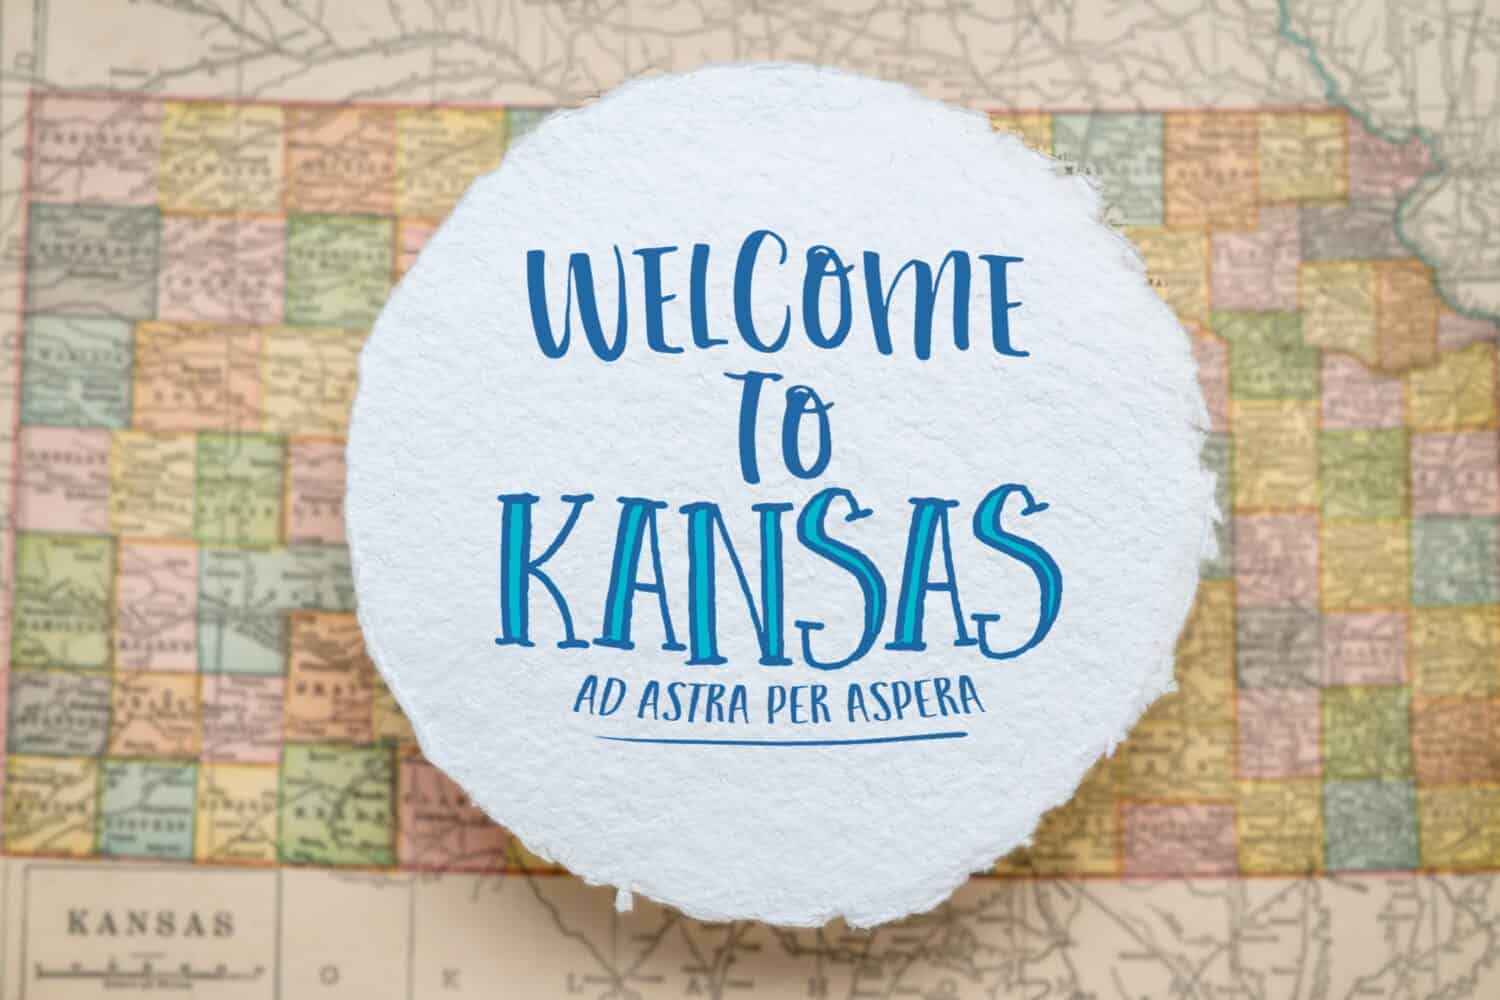 welcome to Kansas, ad astra per aspera (to the stars through hardships) - handwriting on a sheet of rough handmade paper floating over vintage defocused map of Kansas, hospitality and travel concept